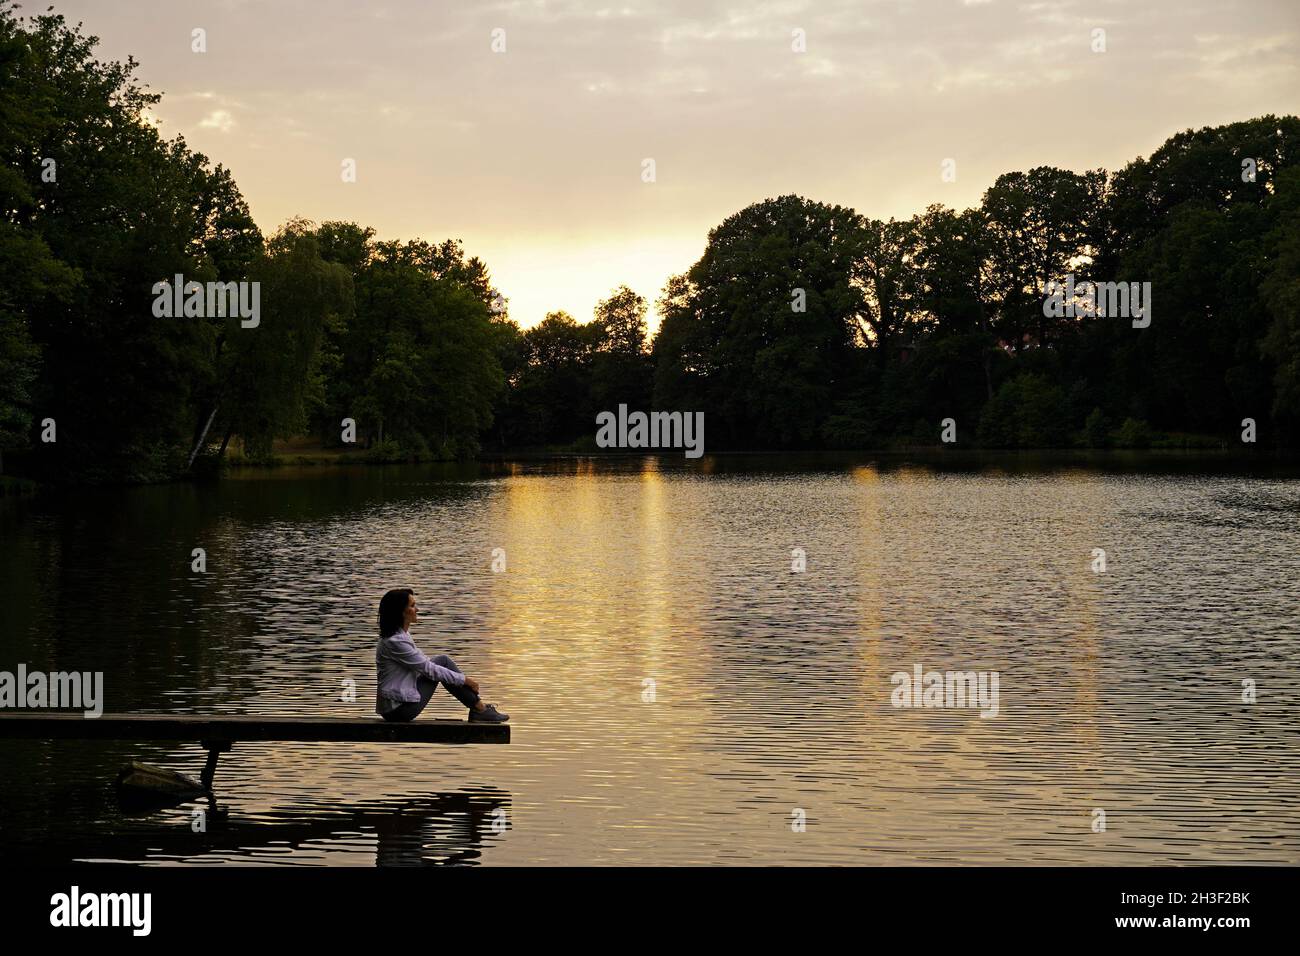 Woman sitting on a jetty by the lake. Sunset in the evening with reflection in the water. Rest and relaxation in nature. Stock Photo